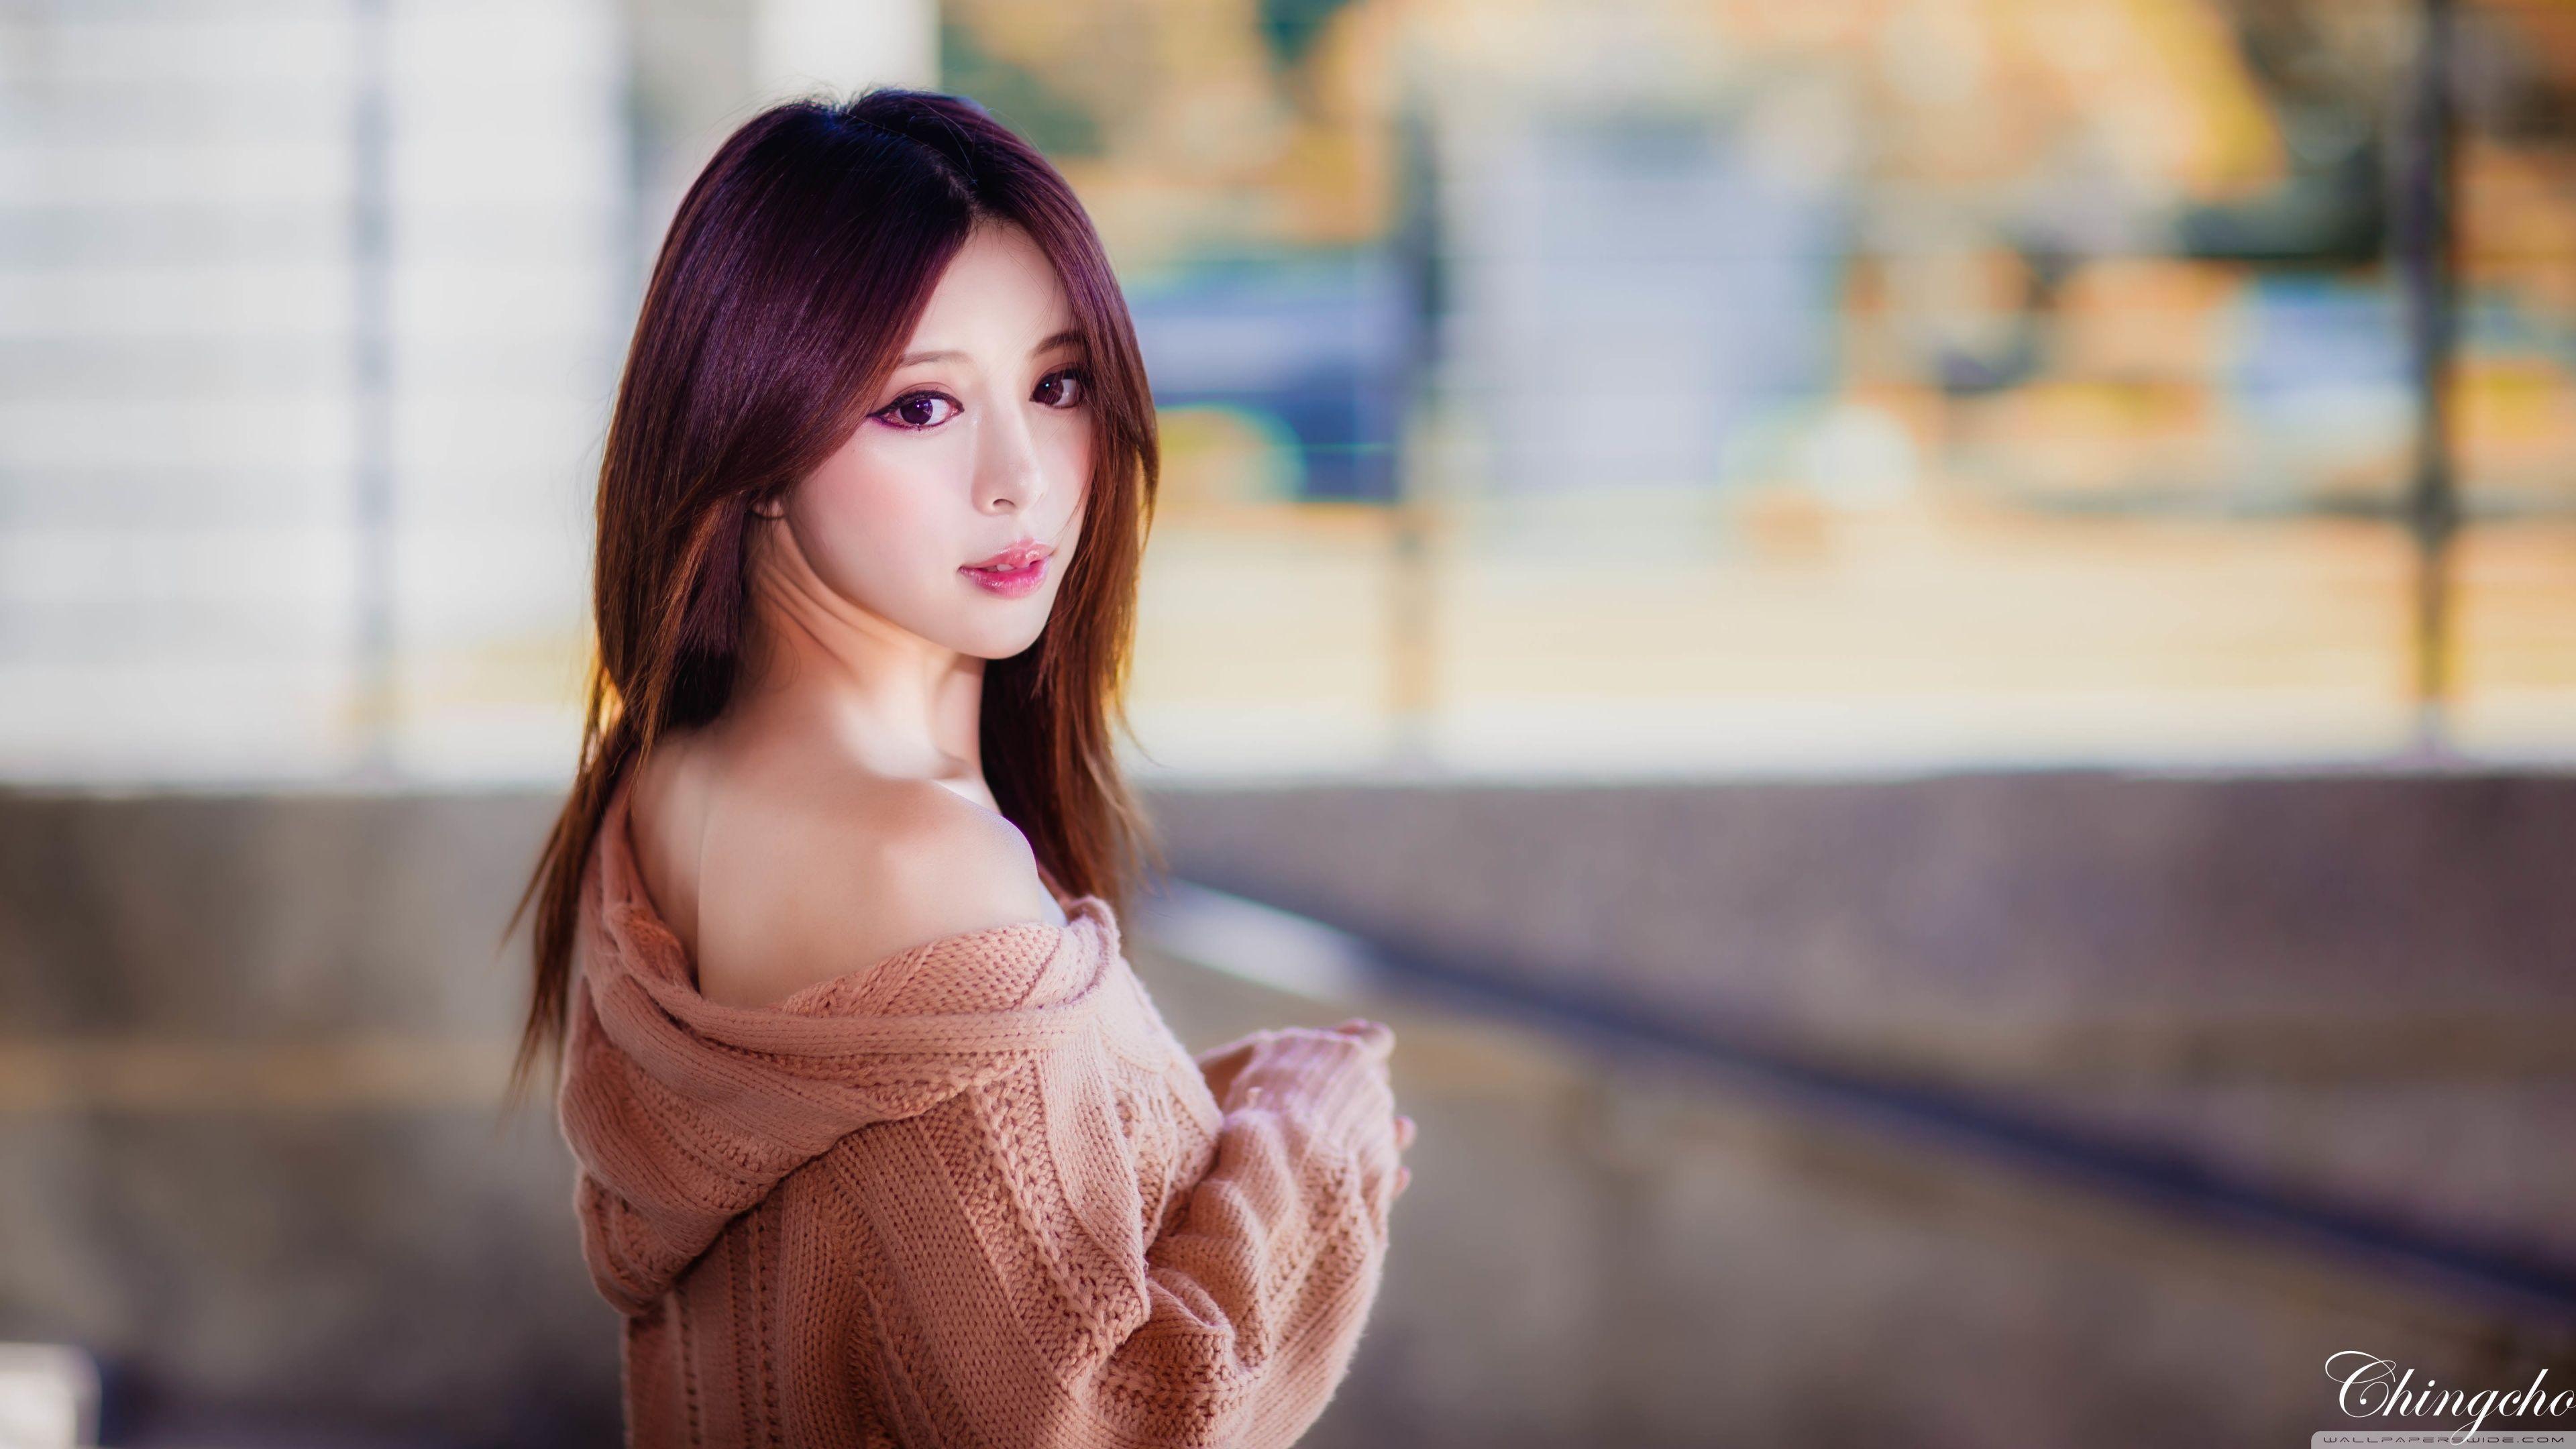 Princess recommendet wallpapers Asian girls